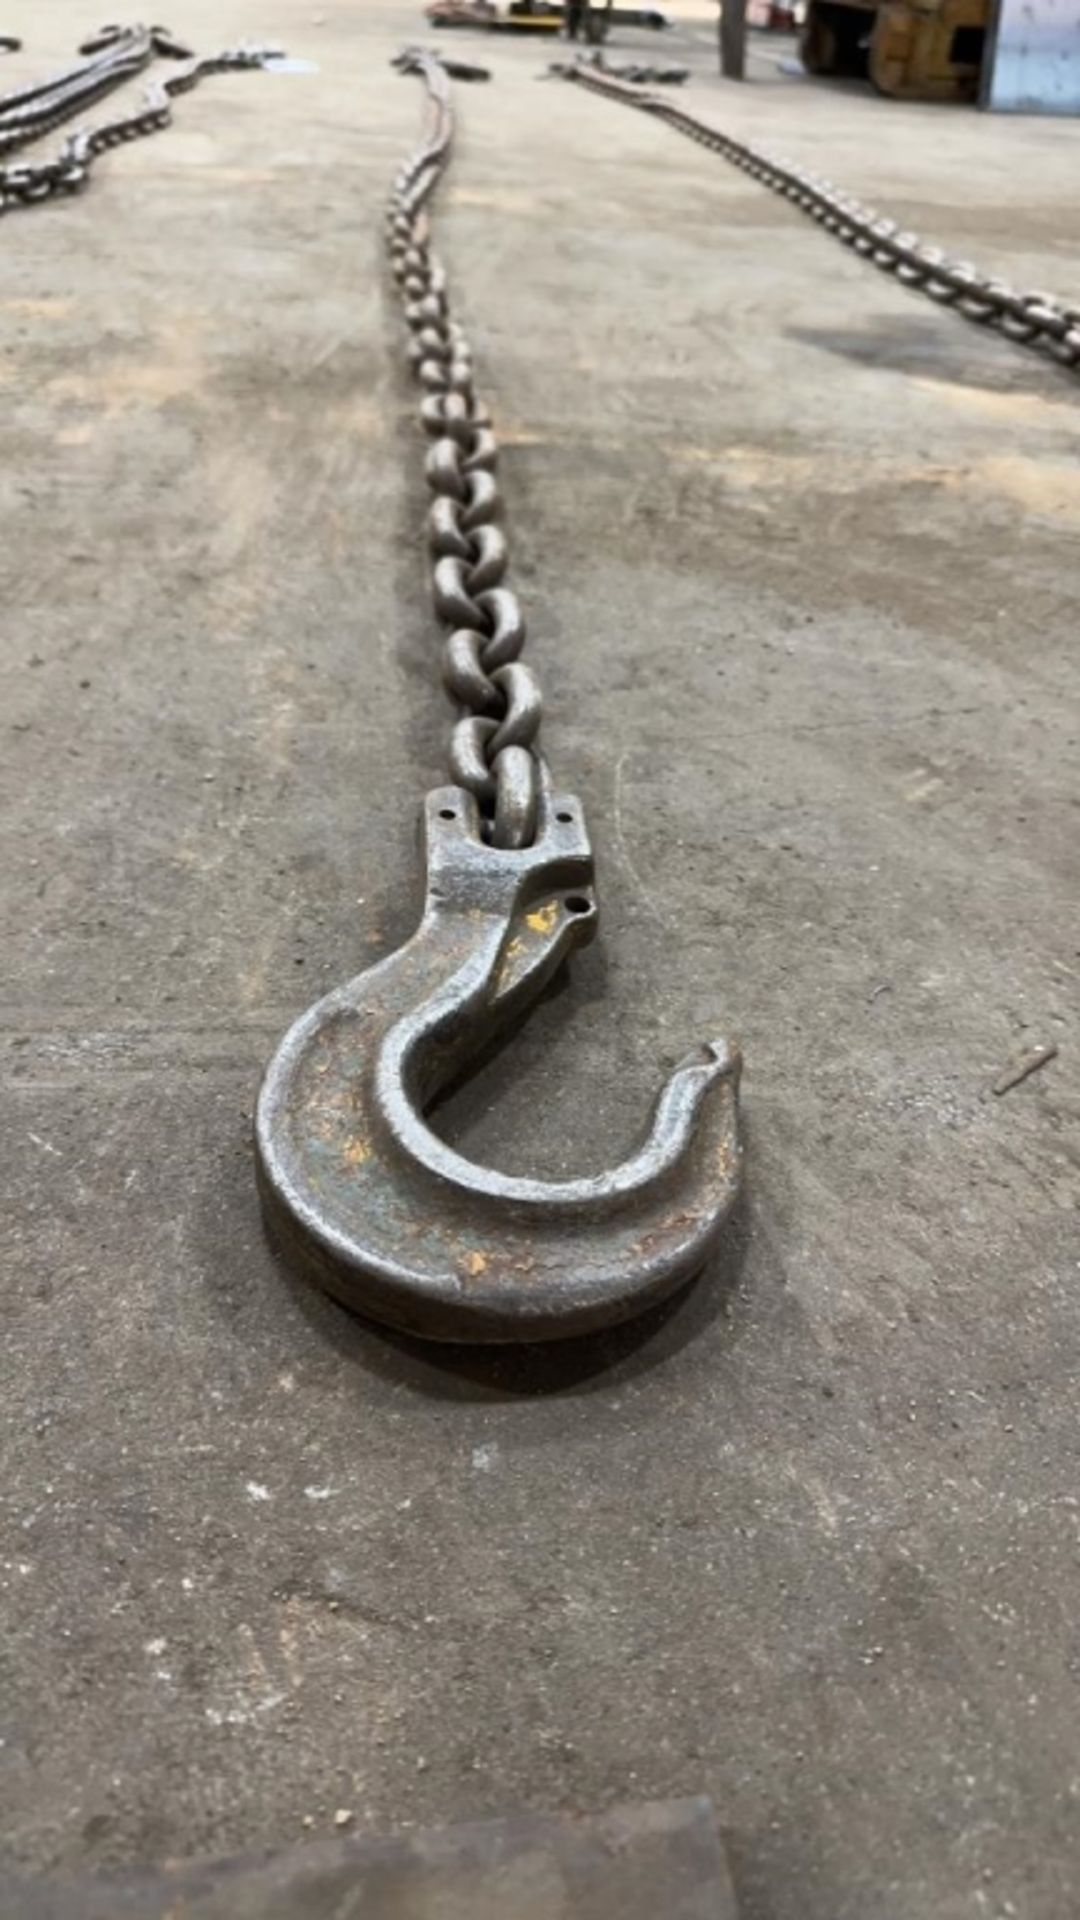 13ft Chain on Rigging Ring with Hoist Hooks - Image 2 of 6